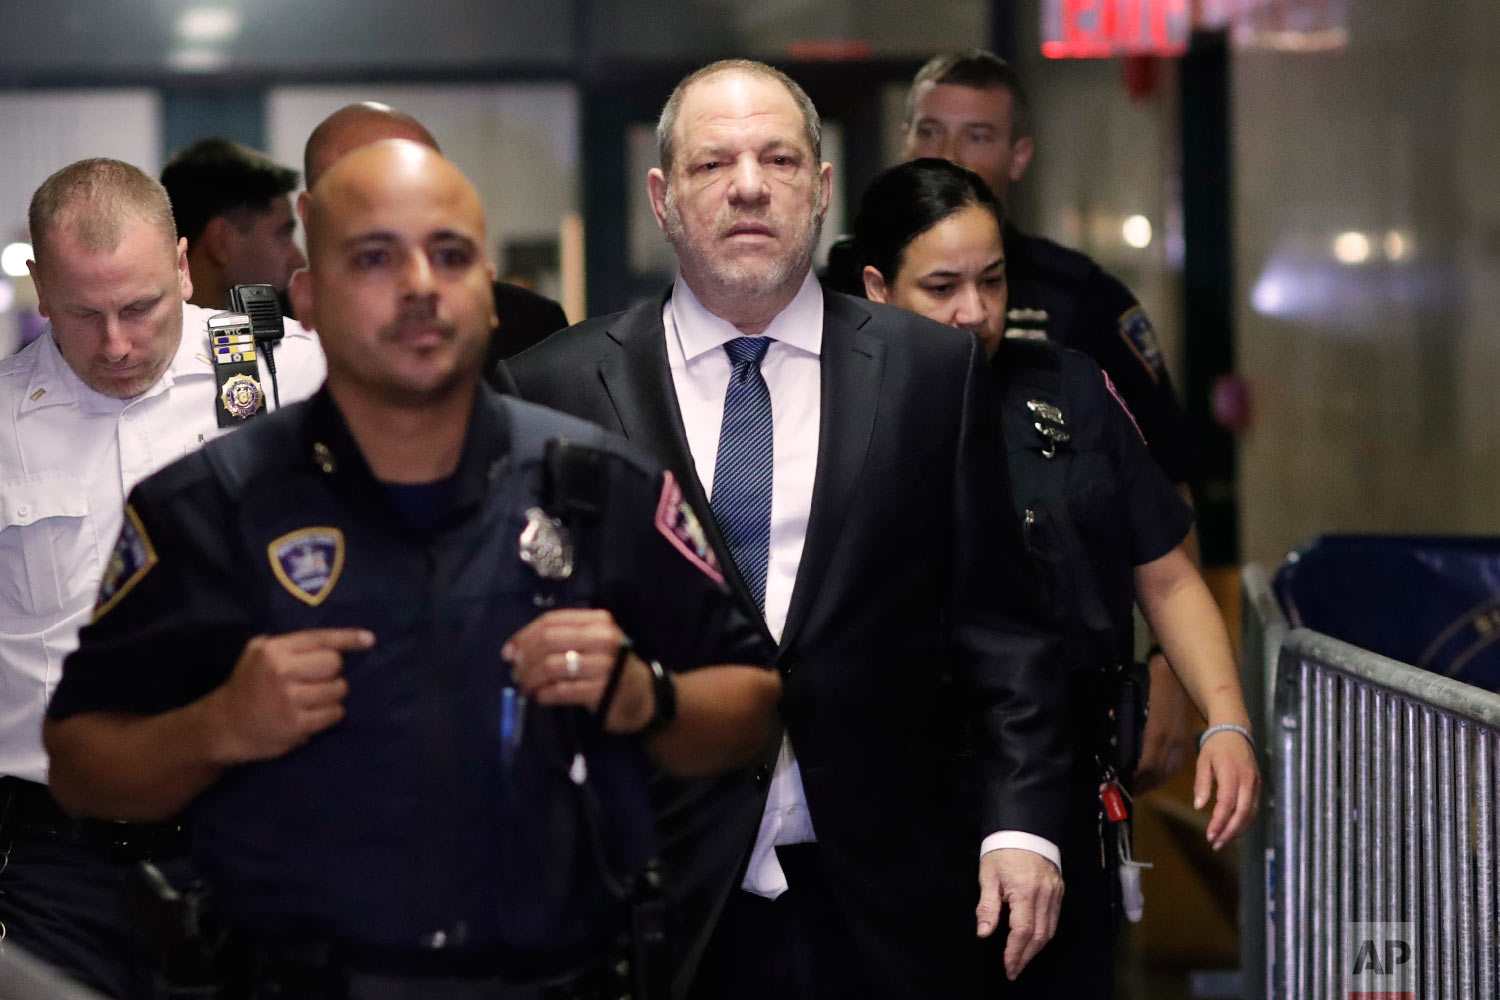  Harvey Weinstein, center, enters State Supreme Court in New York on Oct. 11, 2018. A year earlier, Weinstein was a catalyst in launching the #MeToo movement, which took off in October 2017 after reports in The New Yorker and The New York Times detai